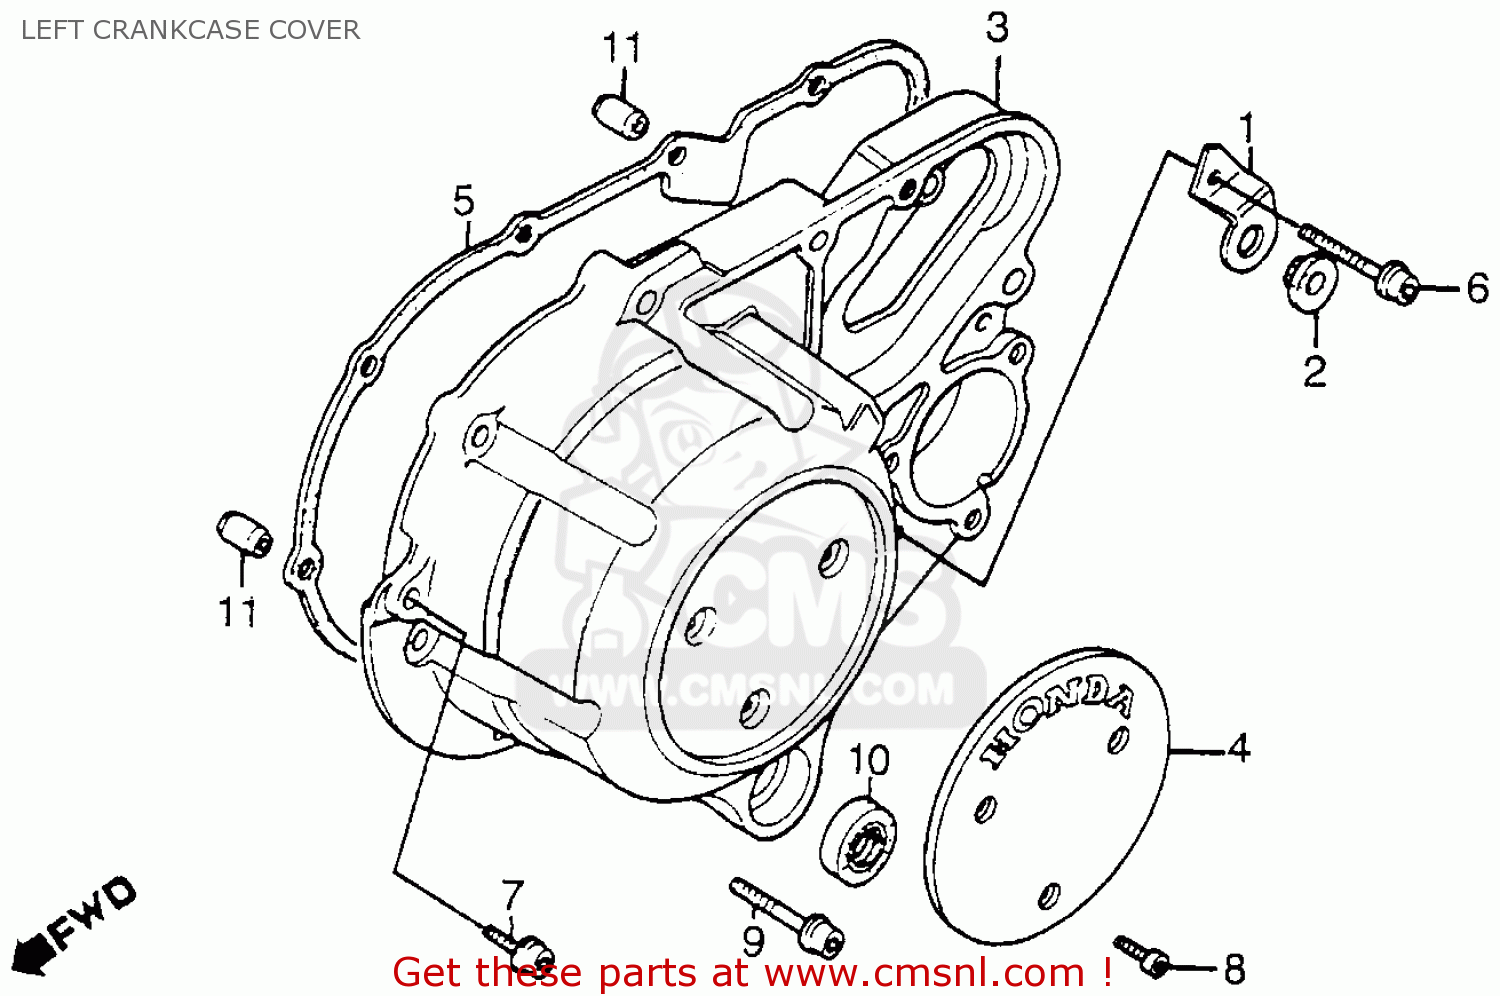 Wiring Diagram Fuel Relay And Fuel Pump '95 Honda Shadow 1100 from images.cmsnl.com